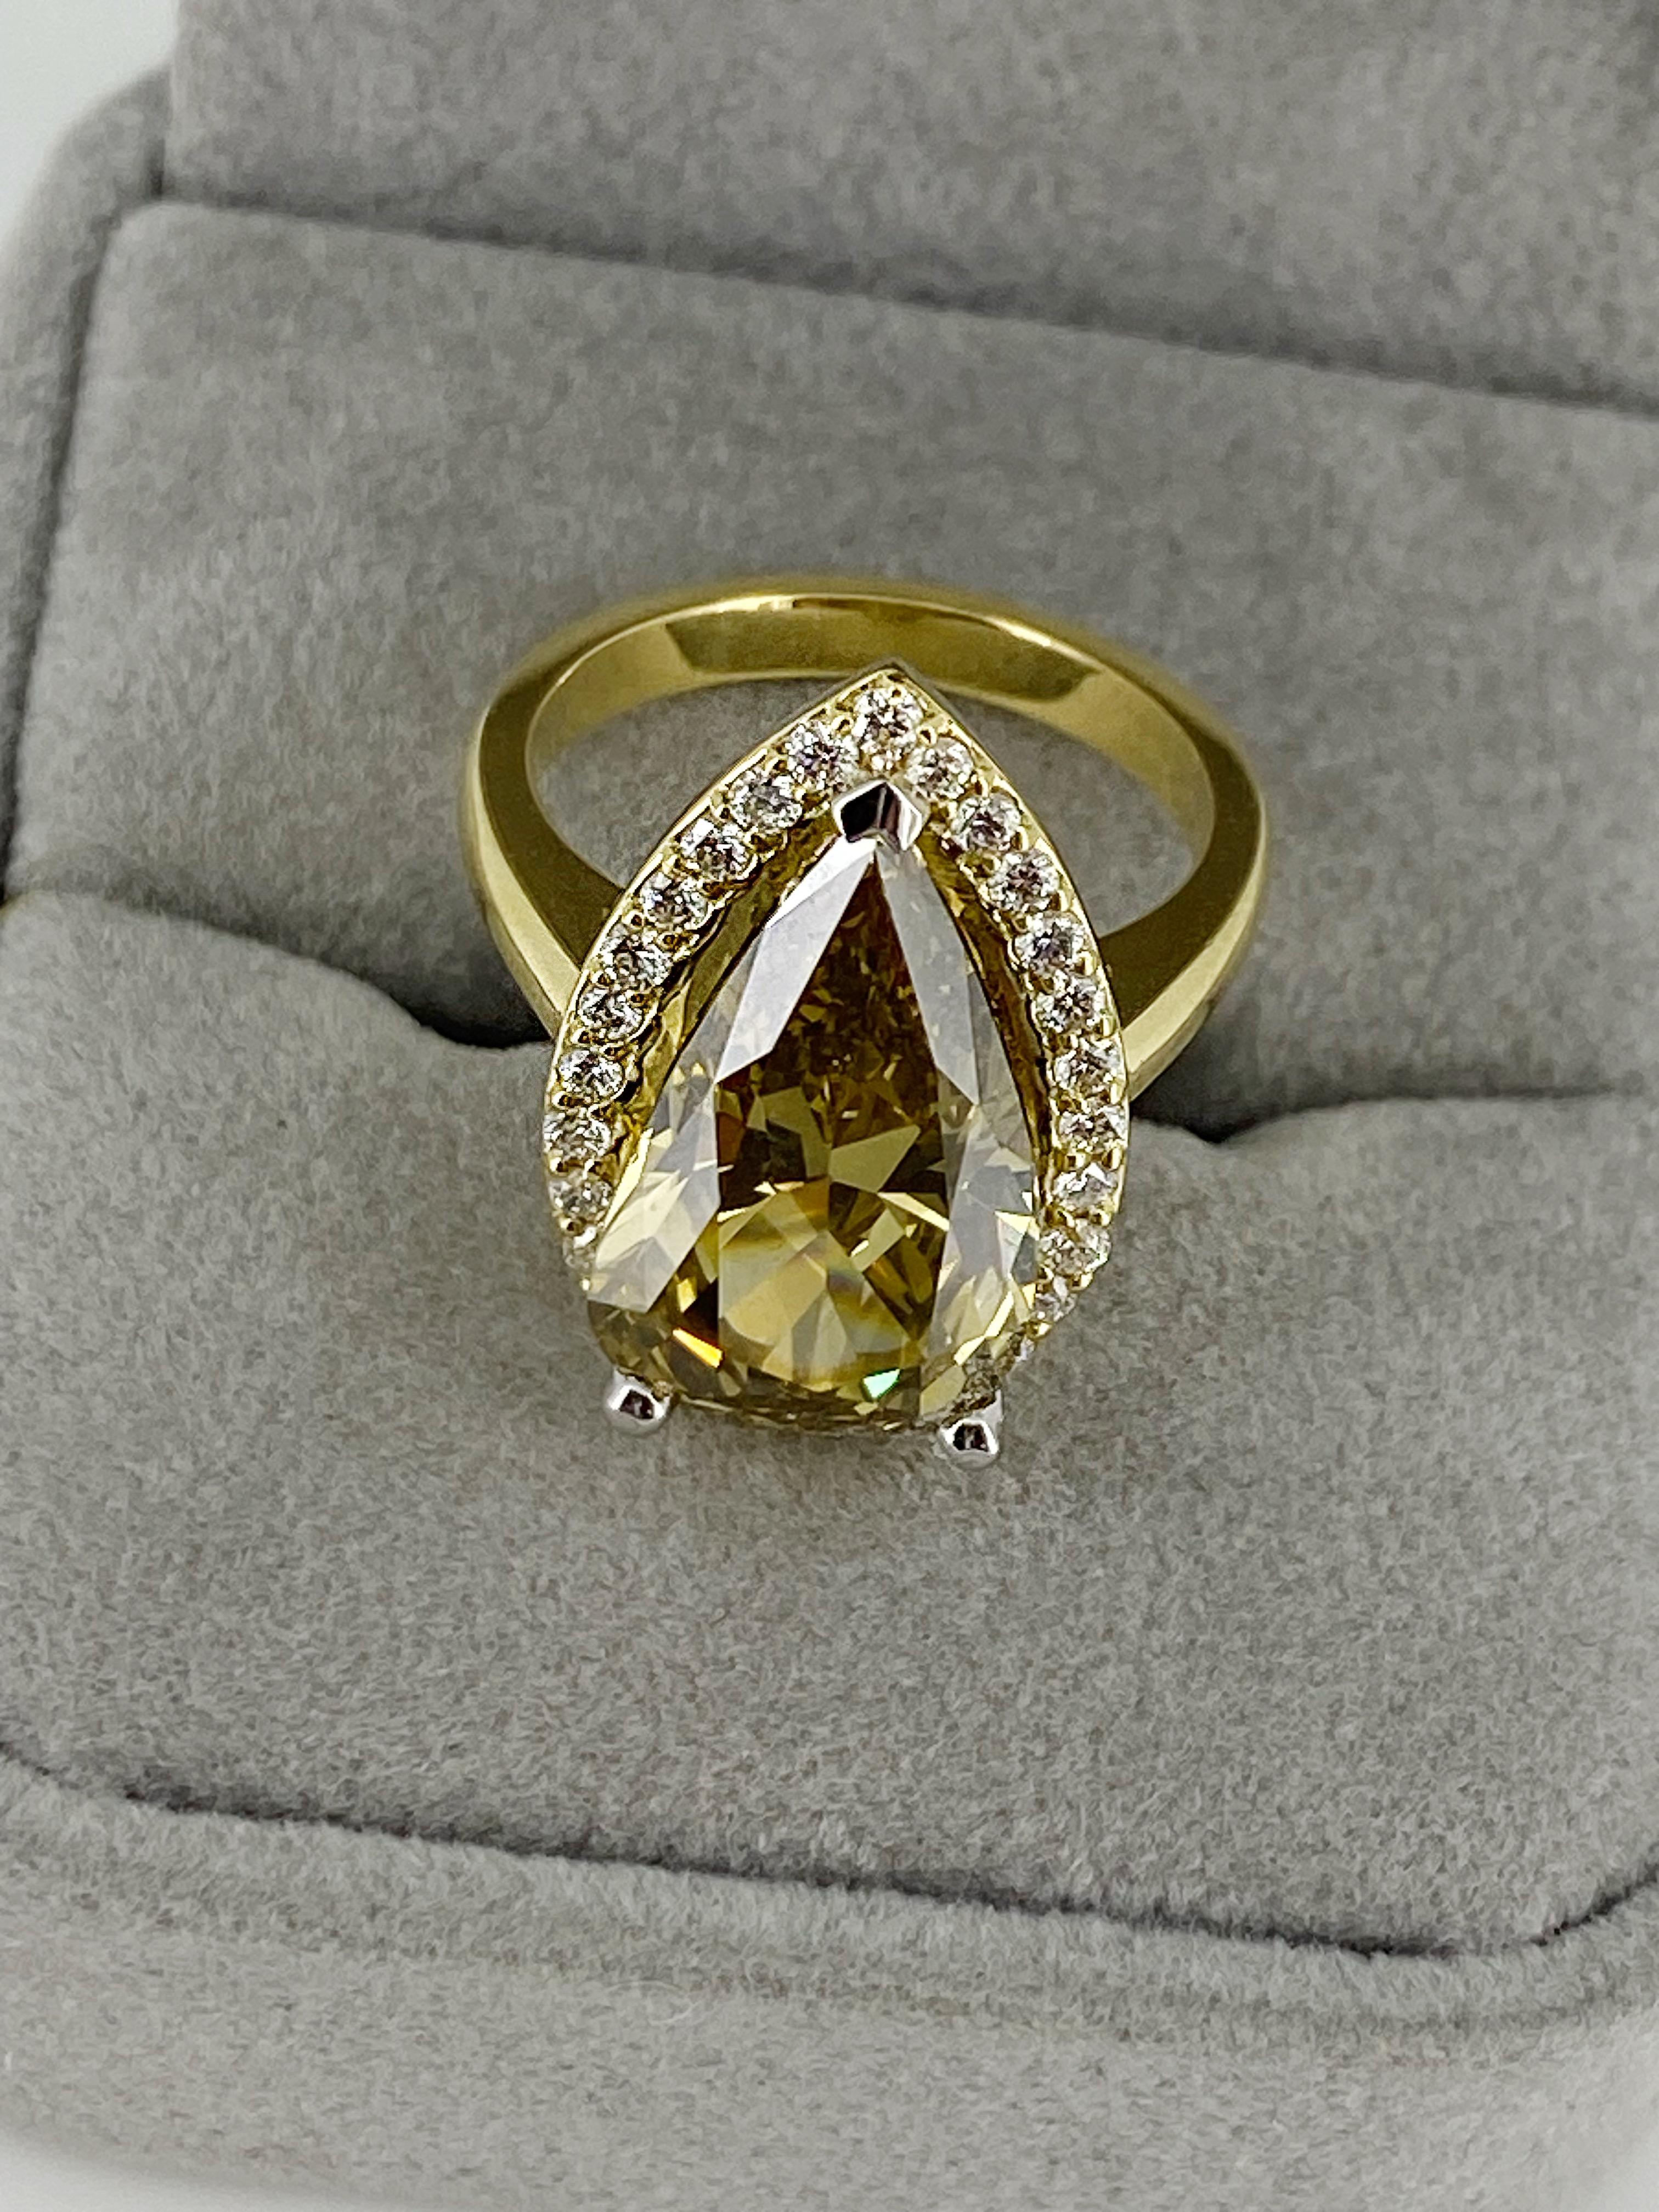 6.36ct Fancy Brownish Yellow Natural Pear Cut Diamond Ring in 18K Yellow Gold For Sale 7